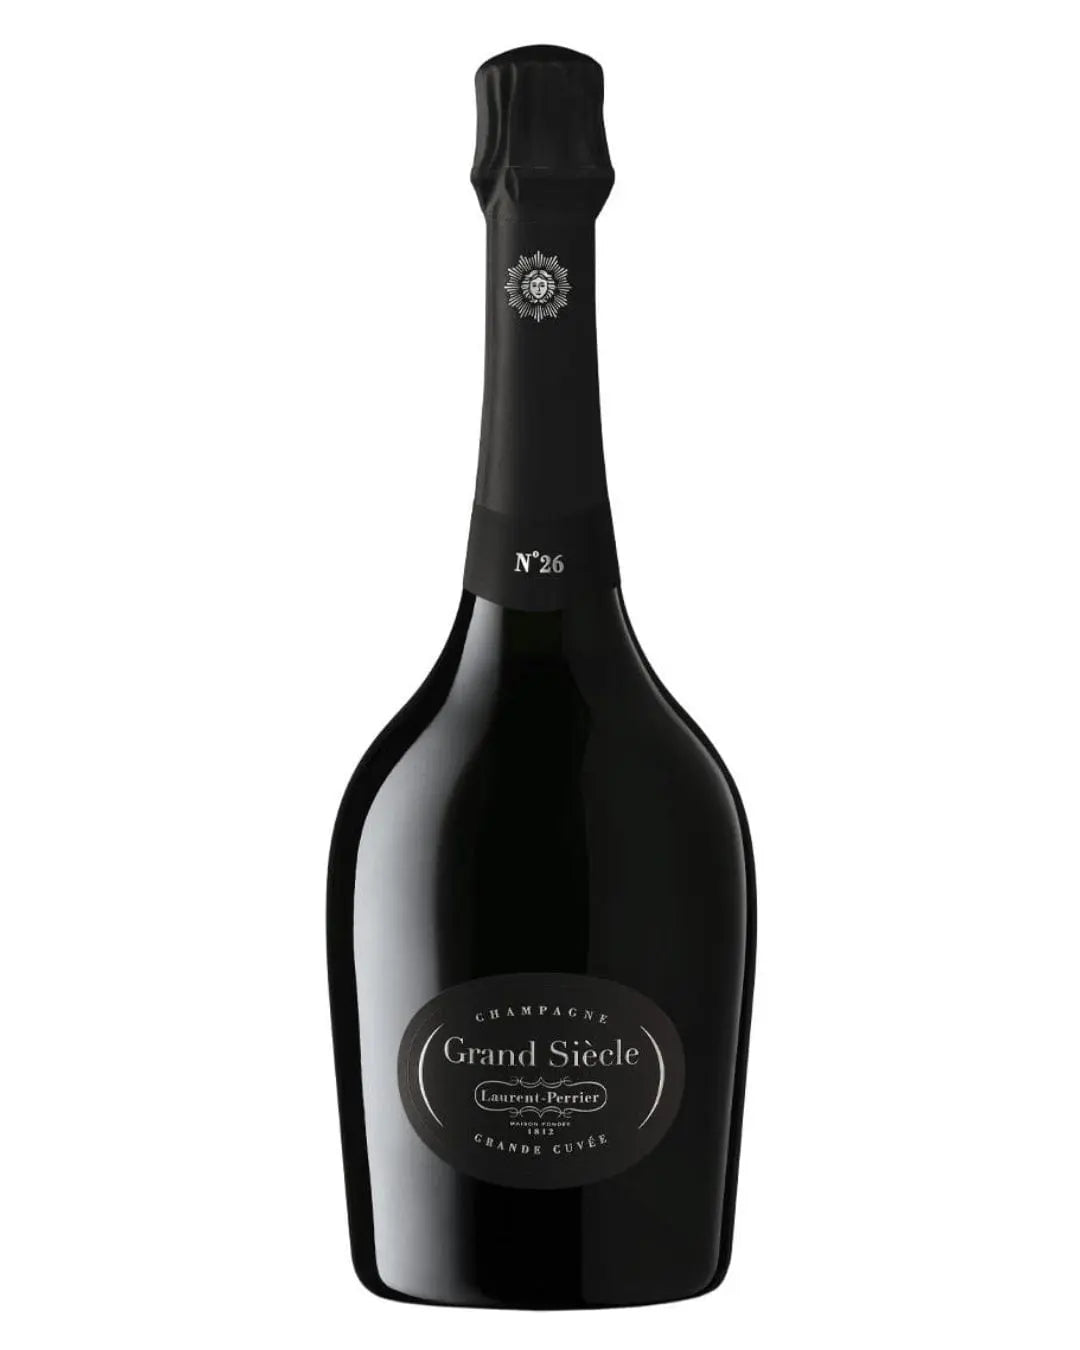 Laurent-Perrier Grand Siecle No 26 Champagne, 75 cl Champagne & Sparkling